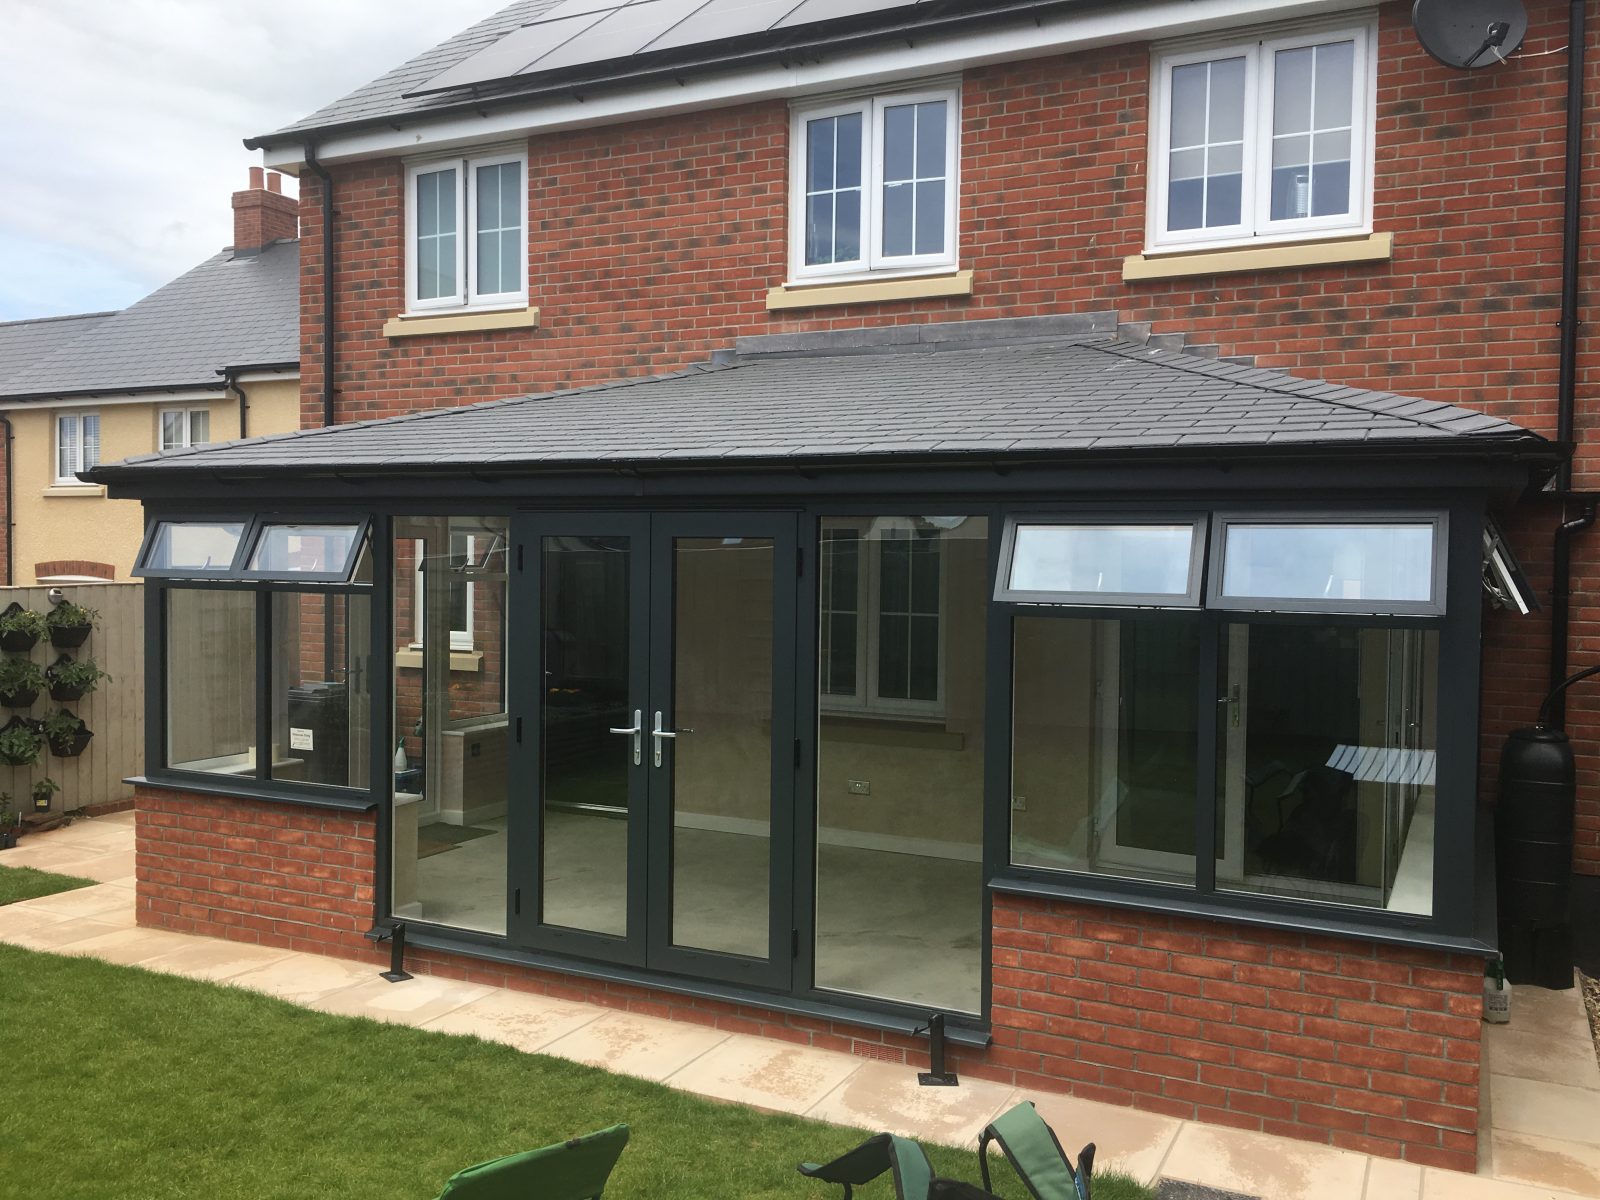 5 BENEFITS OF A REPLACEMENT CONSERVATORY ROOF